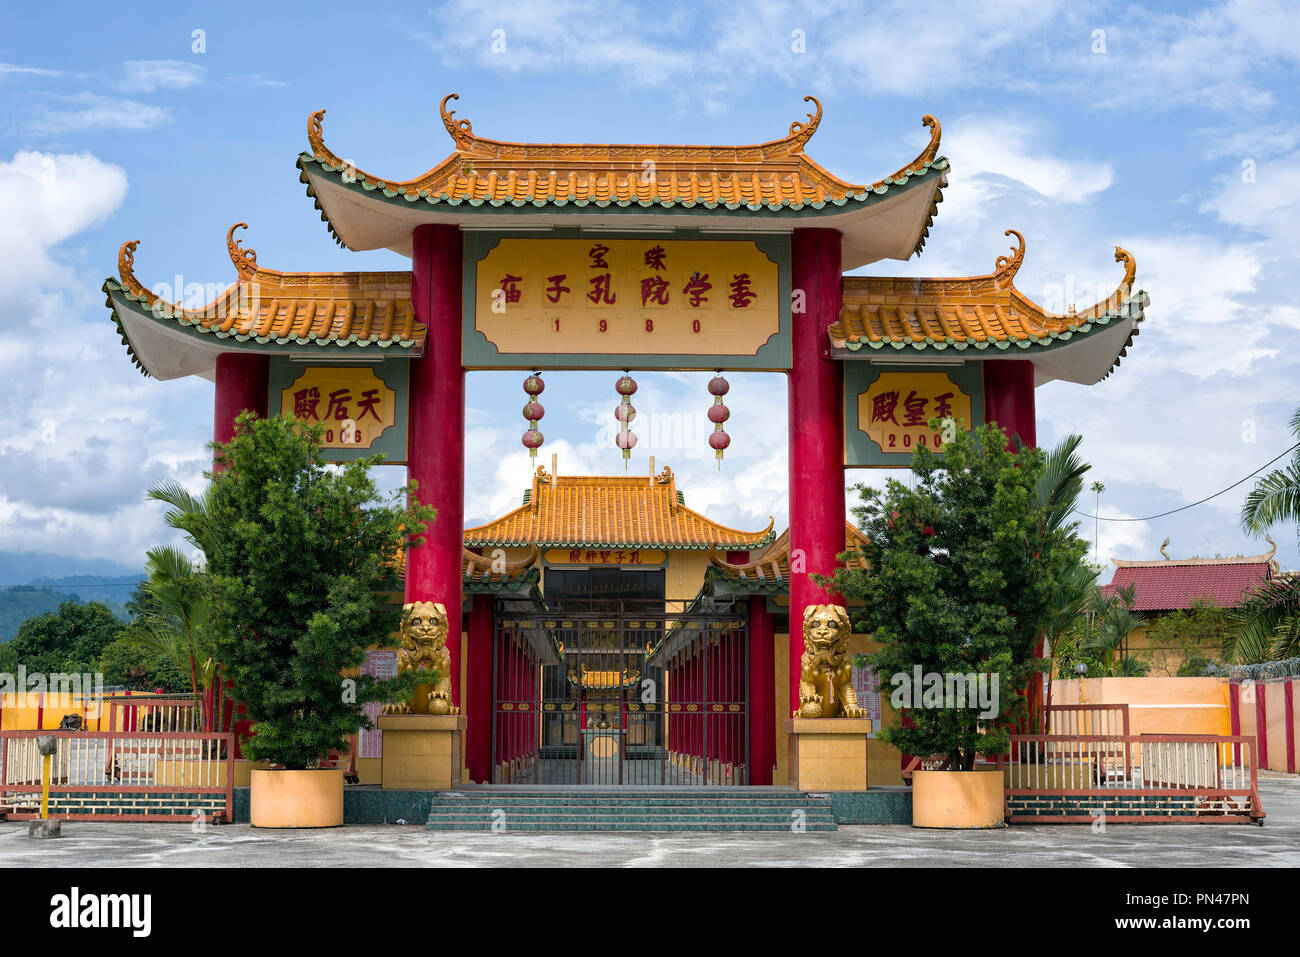 Seen Hock Yeen, Confucius Temple, Chemor, Malaysia - Confucius Temple of Seen Hock Yeen is well-known for bringing luck to students who are going to s Stock Photo